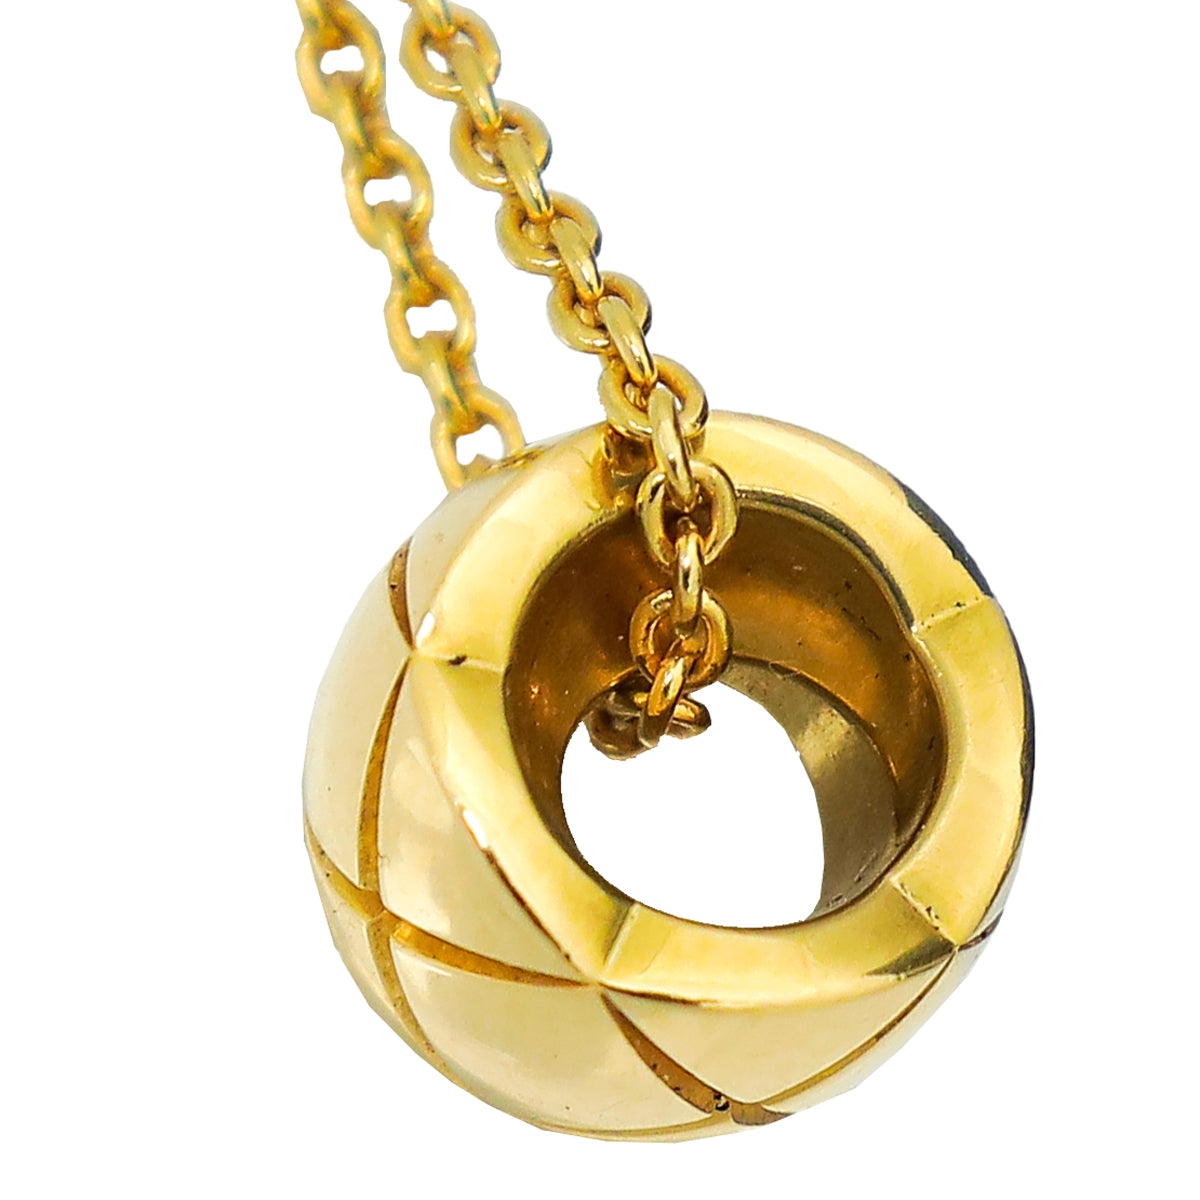 Chanel 18K Yellow Gold Coco Crush Pendant Necklace – The Closet